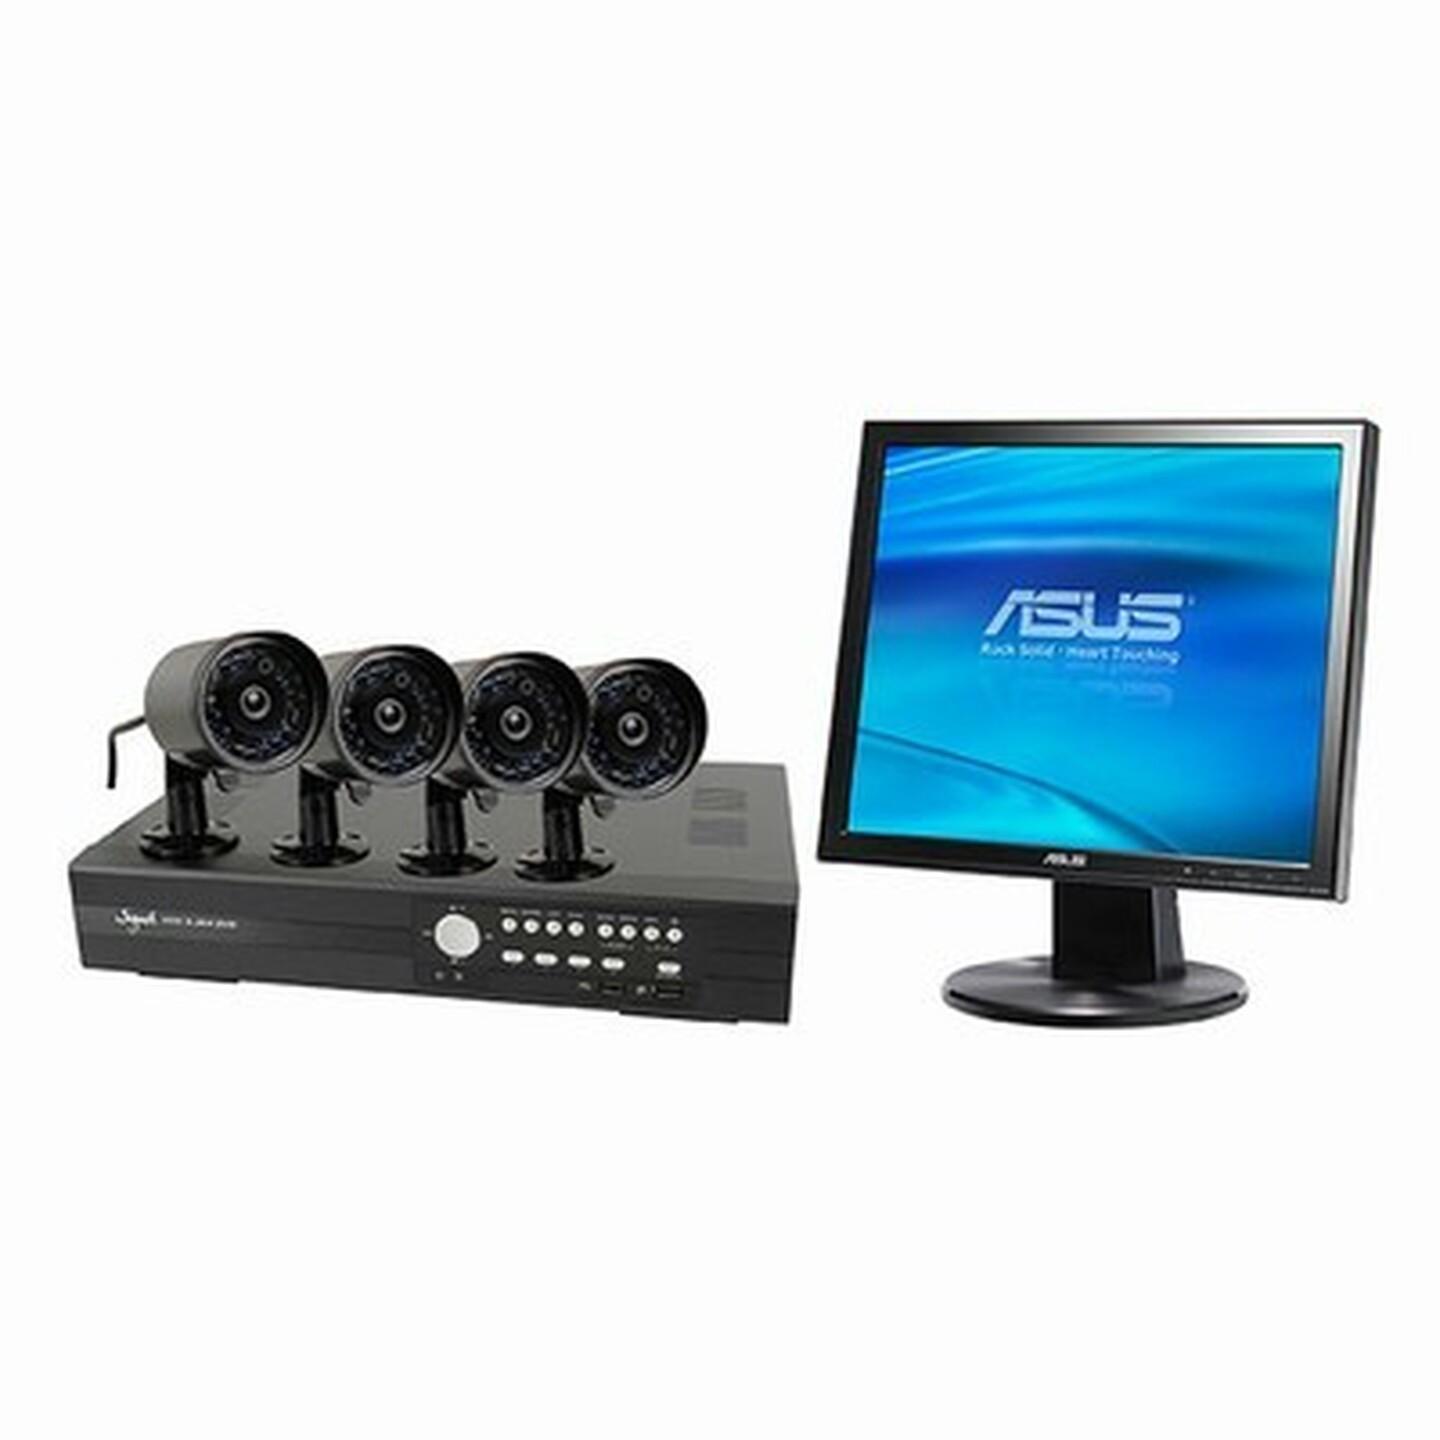 Network 4CH DVR Kit with 17 ASUS Monitor &4 x CCD High Res Cameras